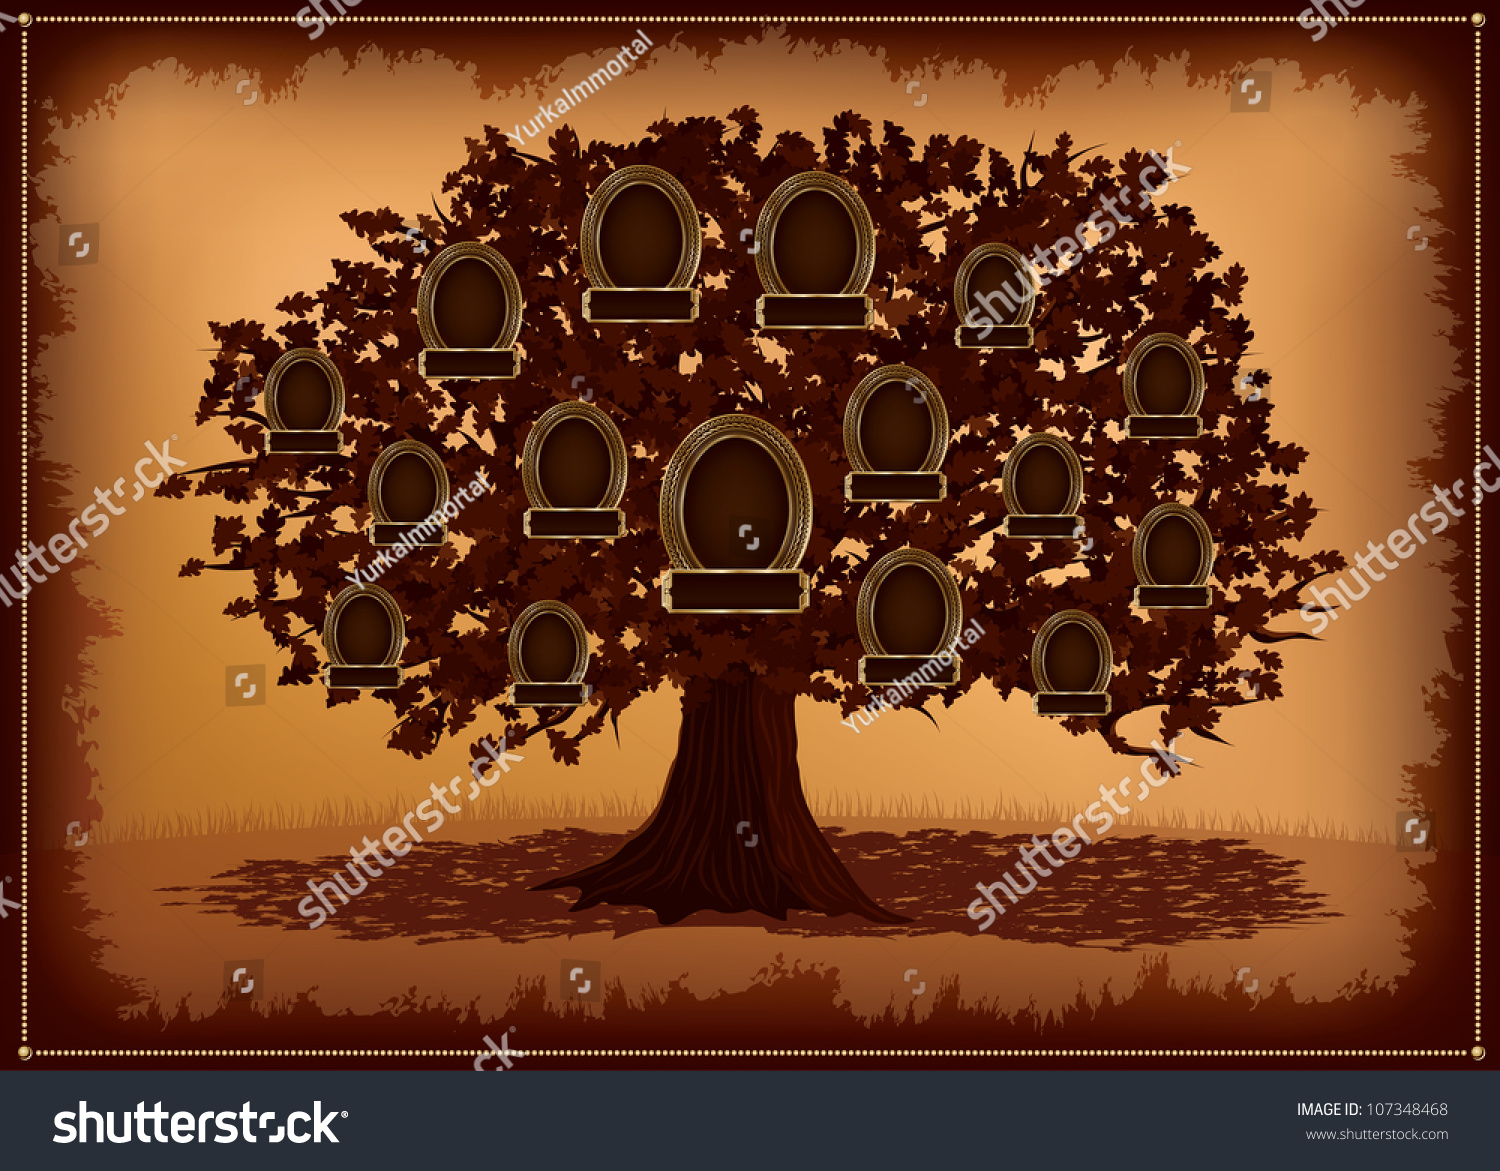 Vector Family Tree With Frames And Leafs. - 107348468 : Shutterstock